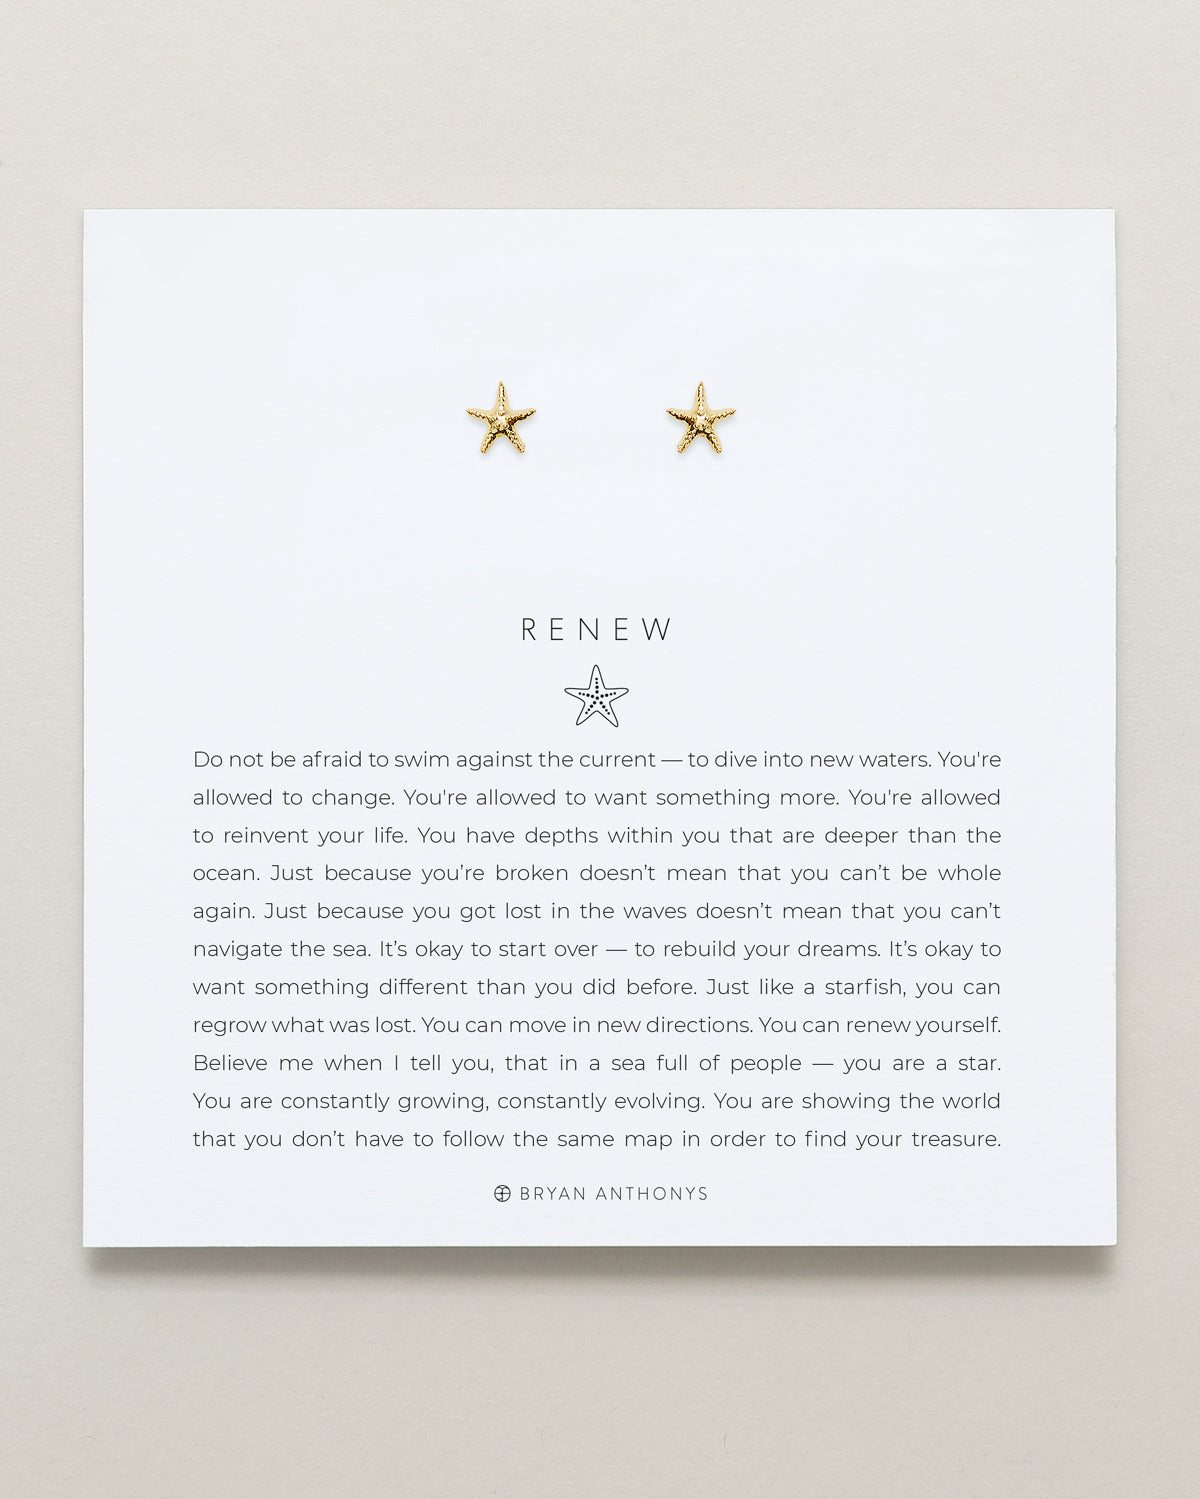 Bryan Anthonys Gold Renew Stud Earrings On Card